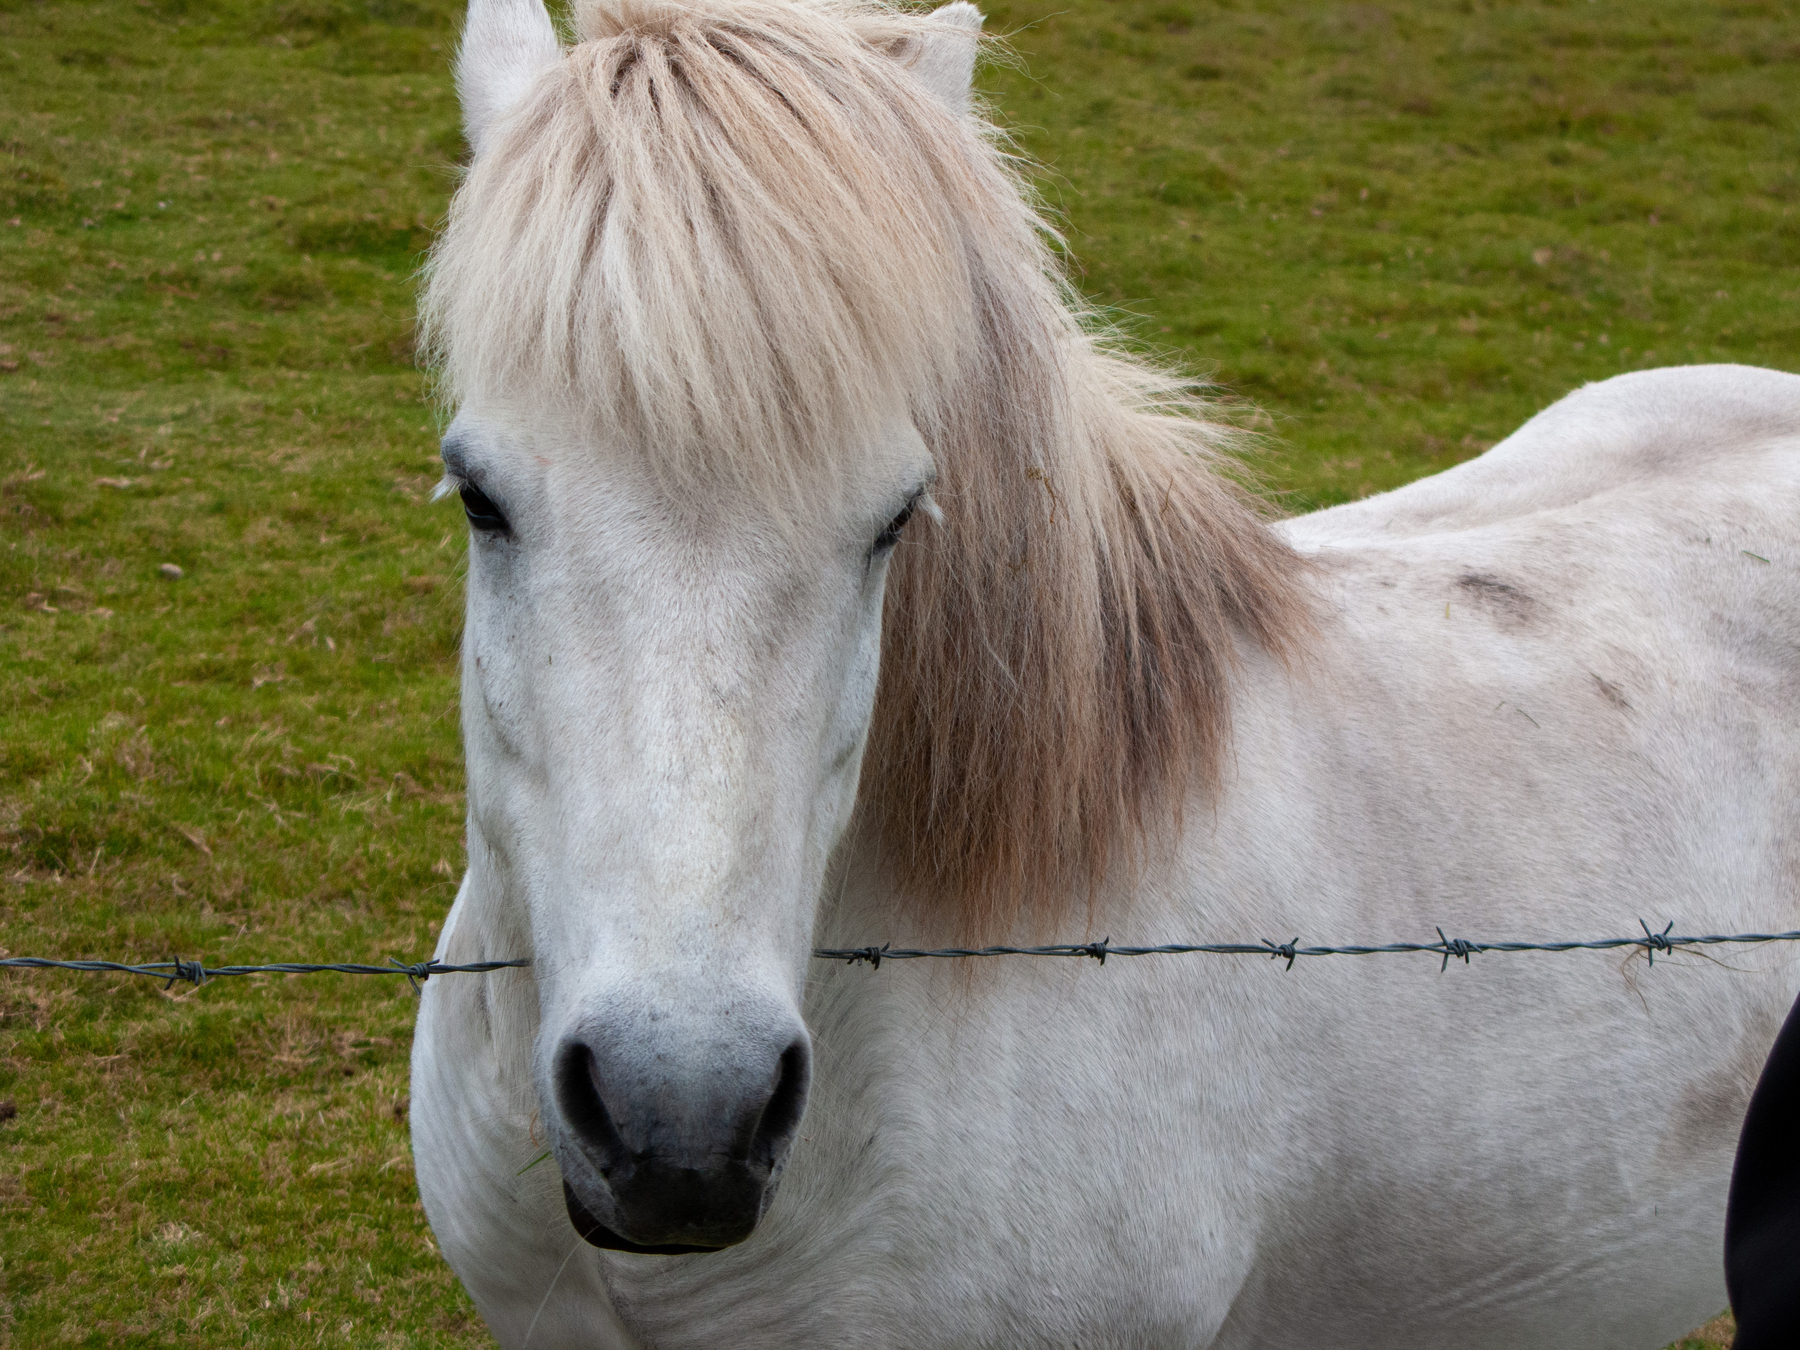 An Icelandic horse looks at us with curiosity. (This is a type of horse, not their nationality, though it was Icelandic too) 